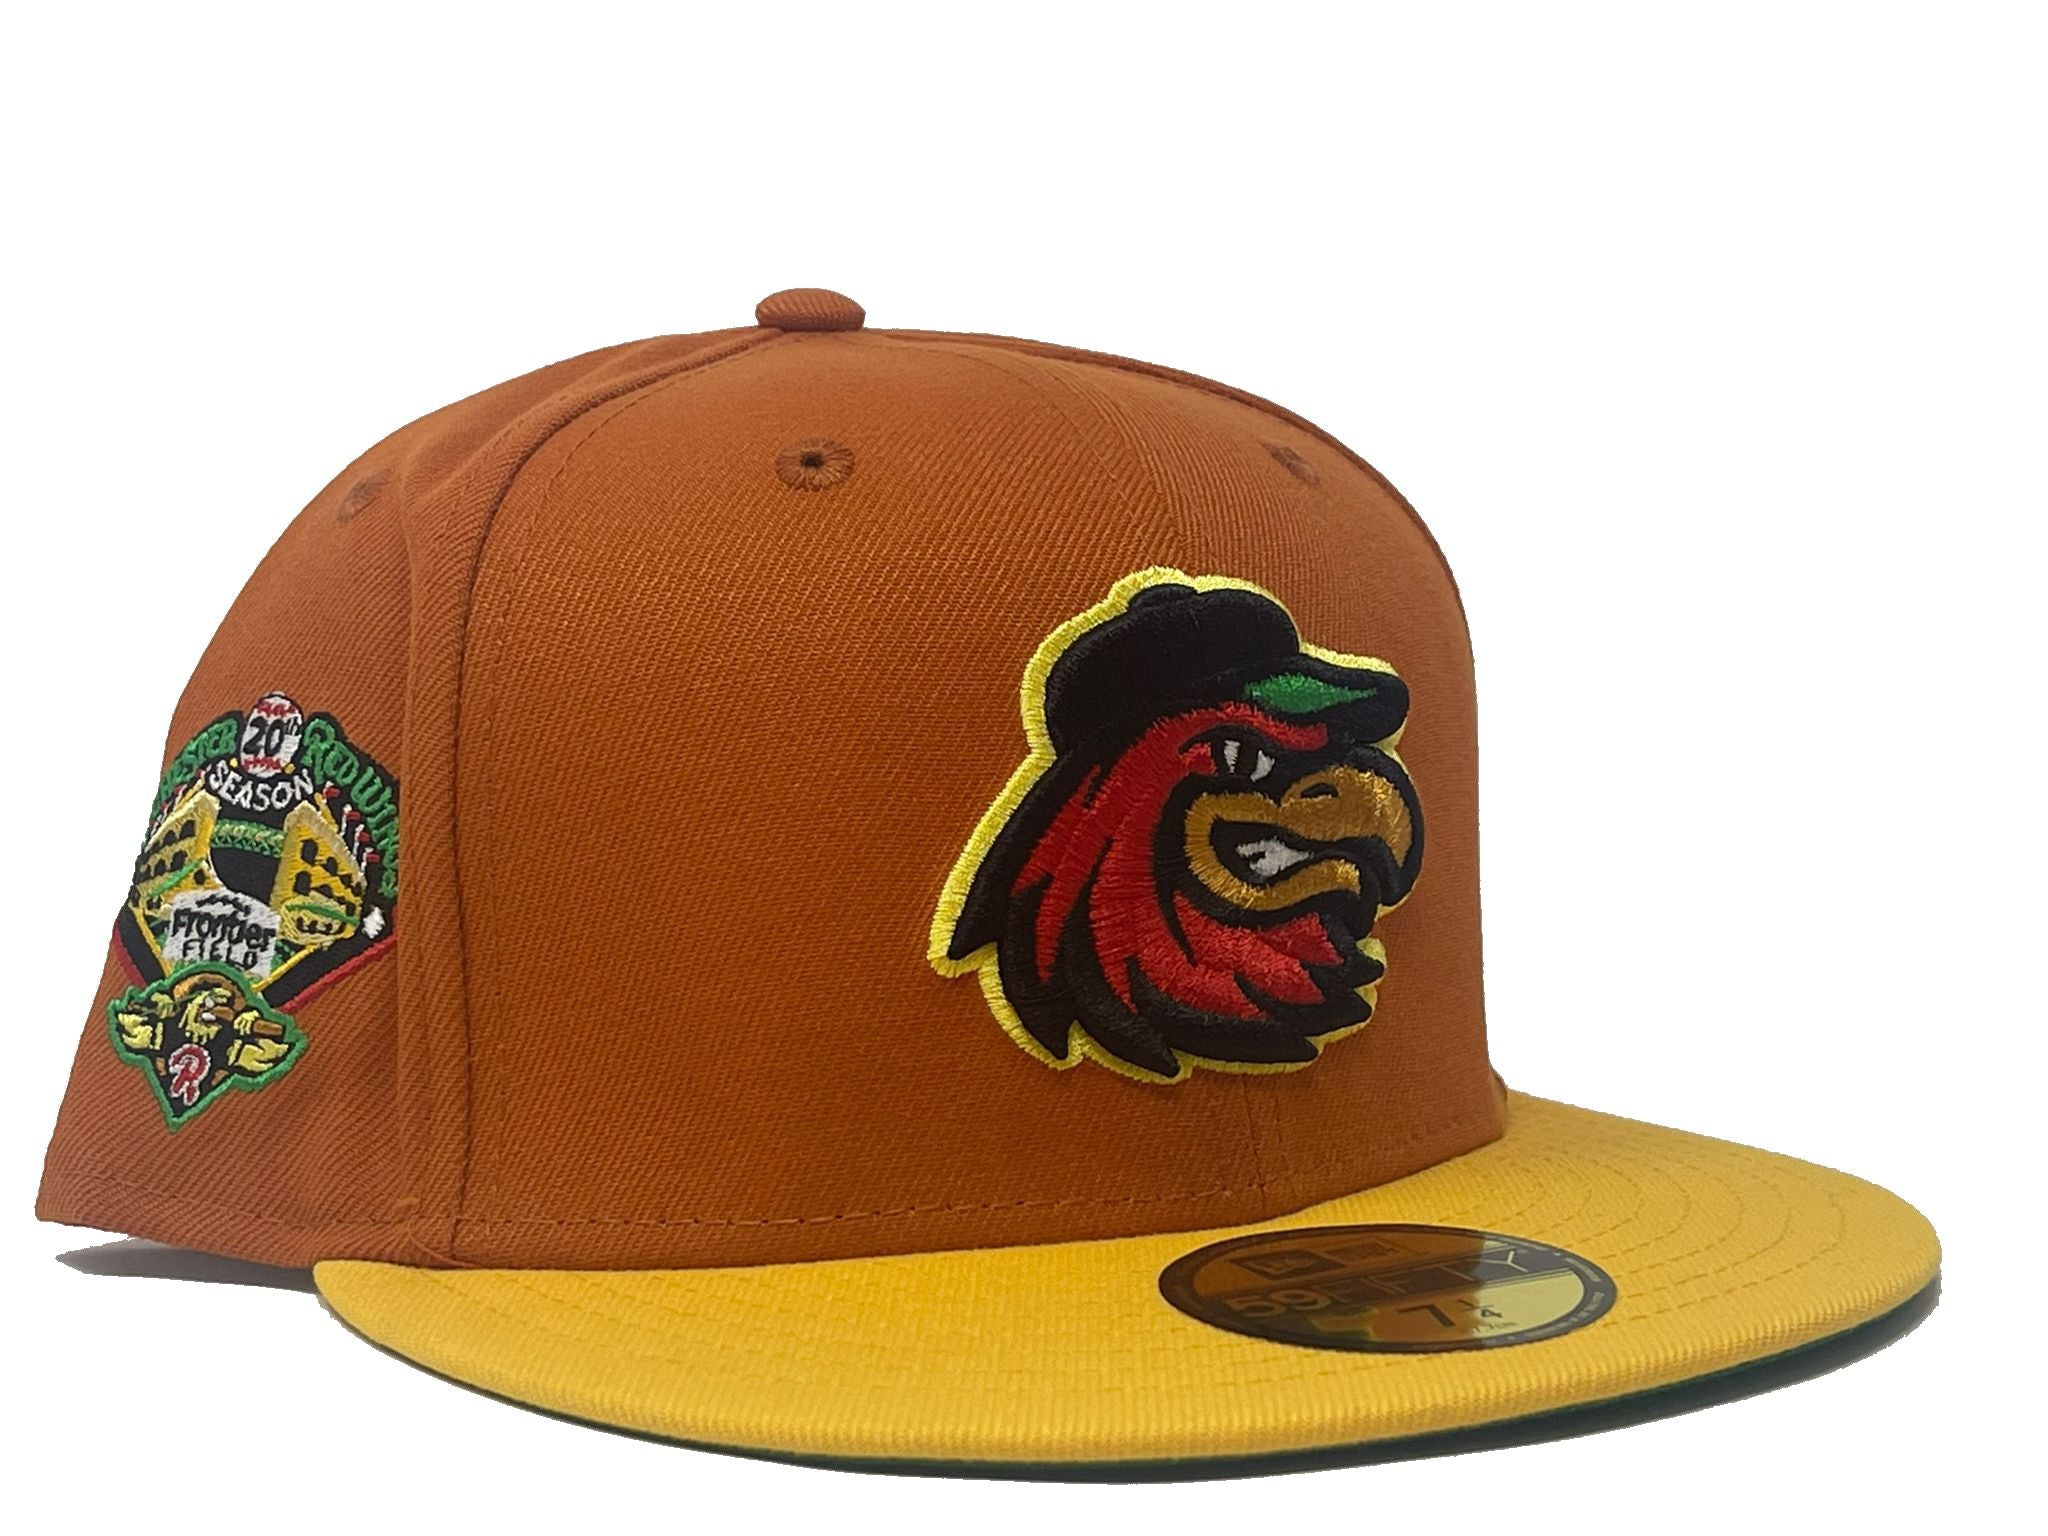 ROCHESTER RED WINGS 20TH ANNIVERSARY MINOR LEAGUE GREEN BEIM NEW